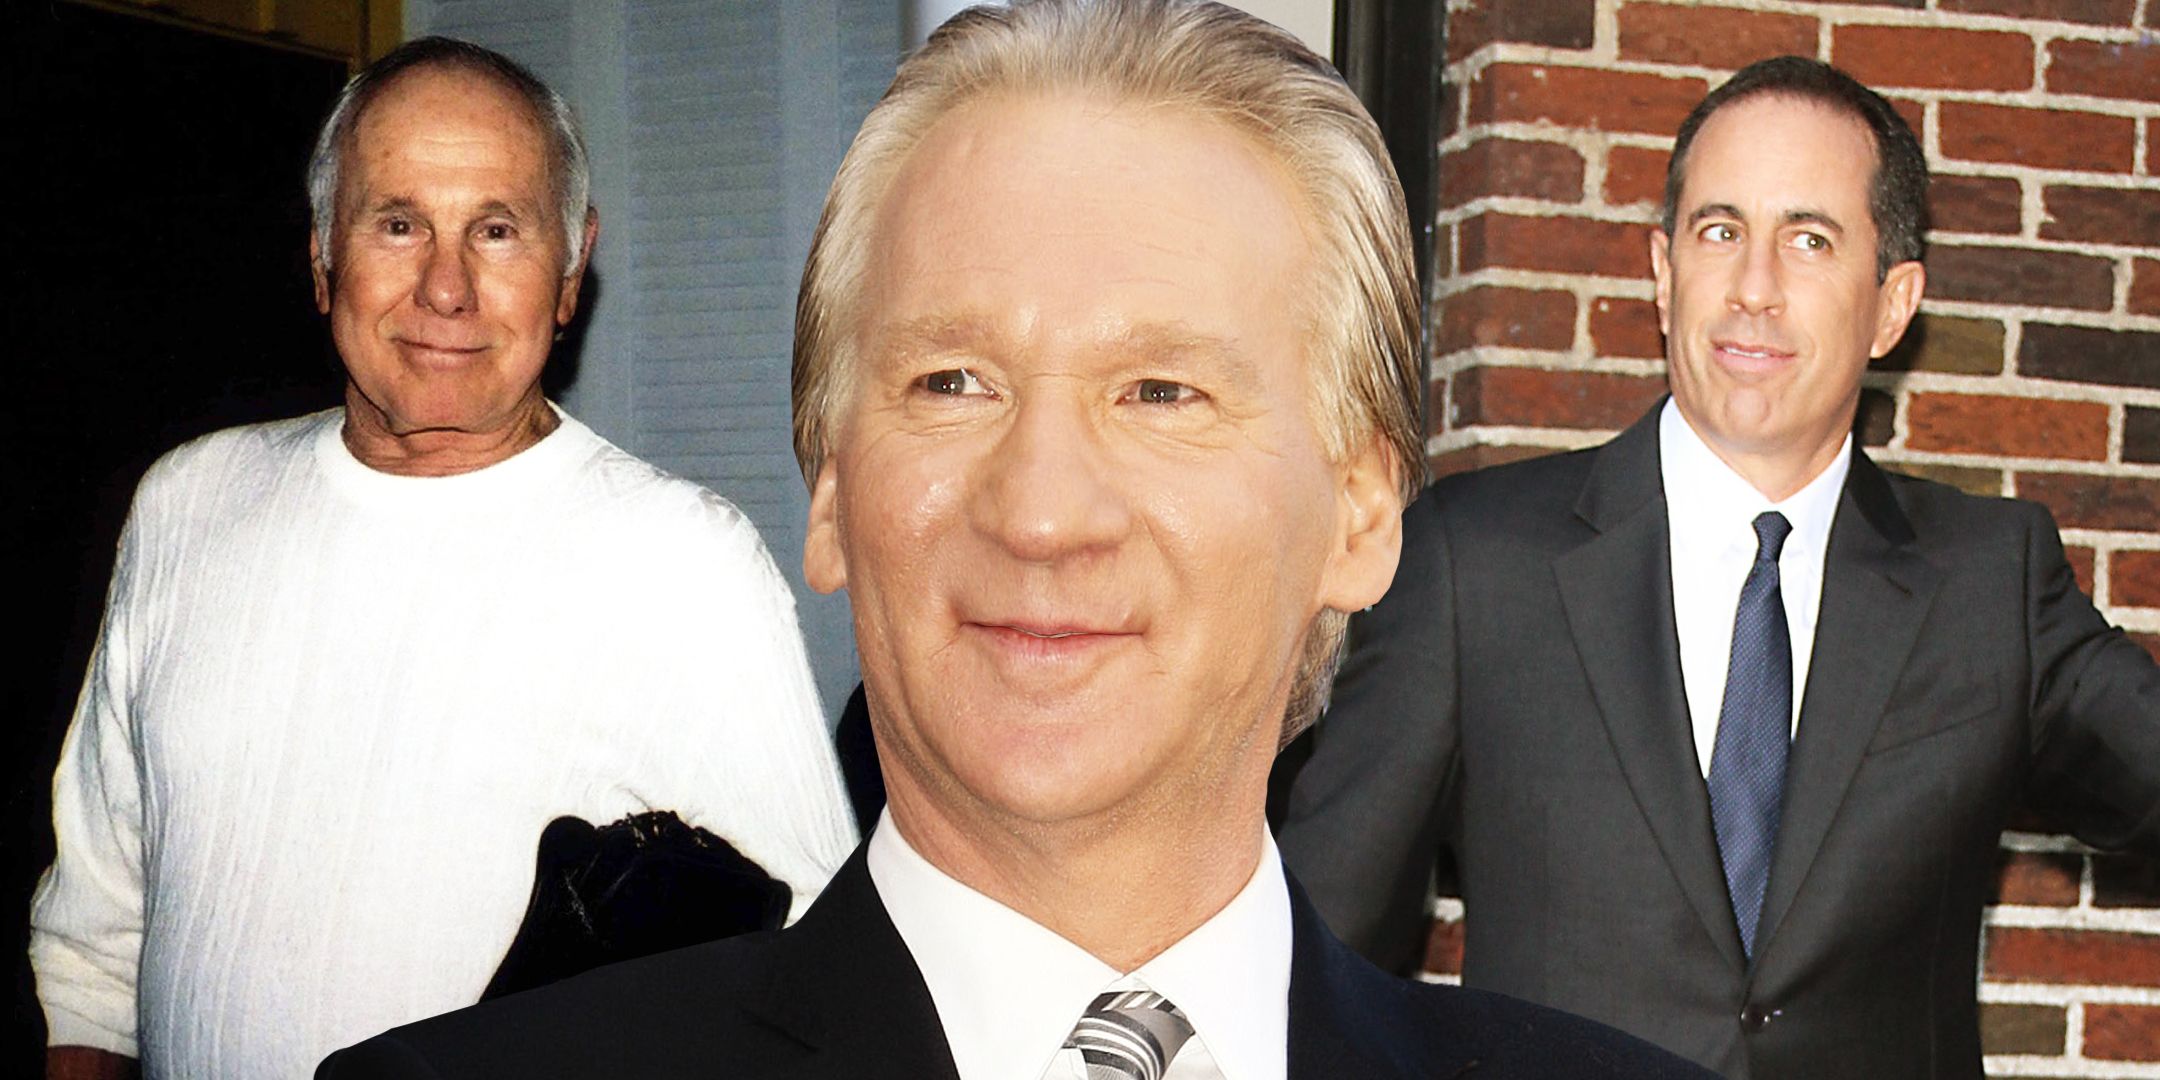 Bill Maher And Jerry Seinfeld Disagree About Johnny Carson's Bad Behavior 